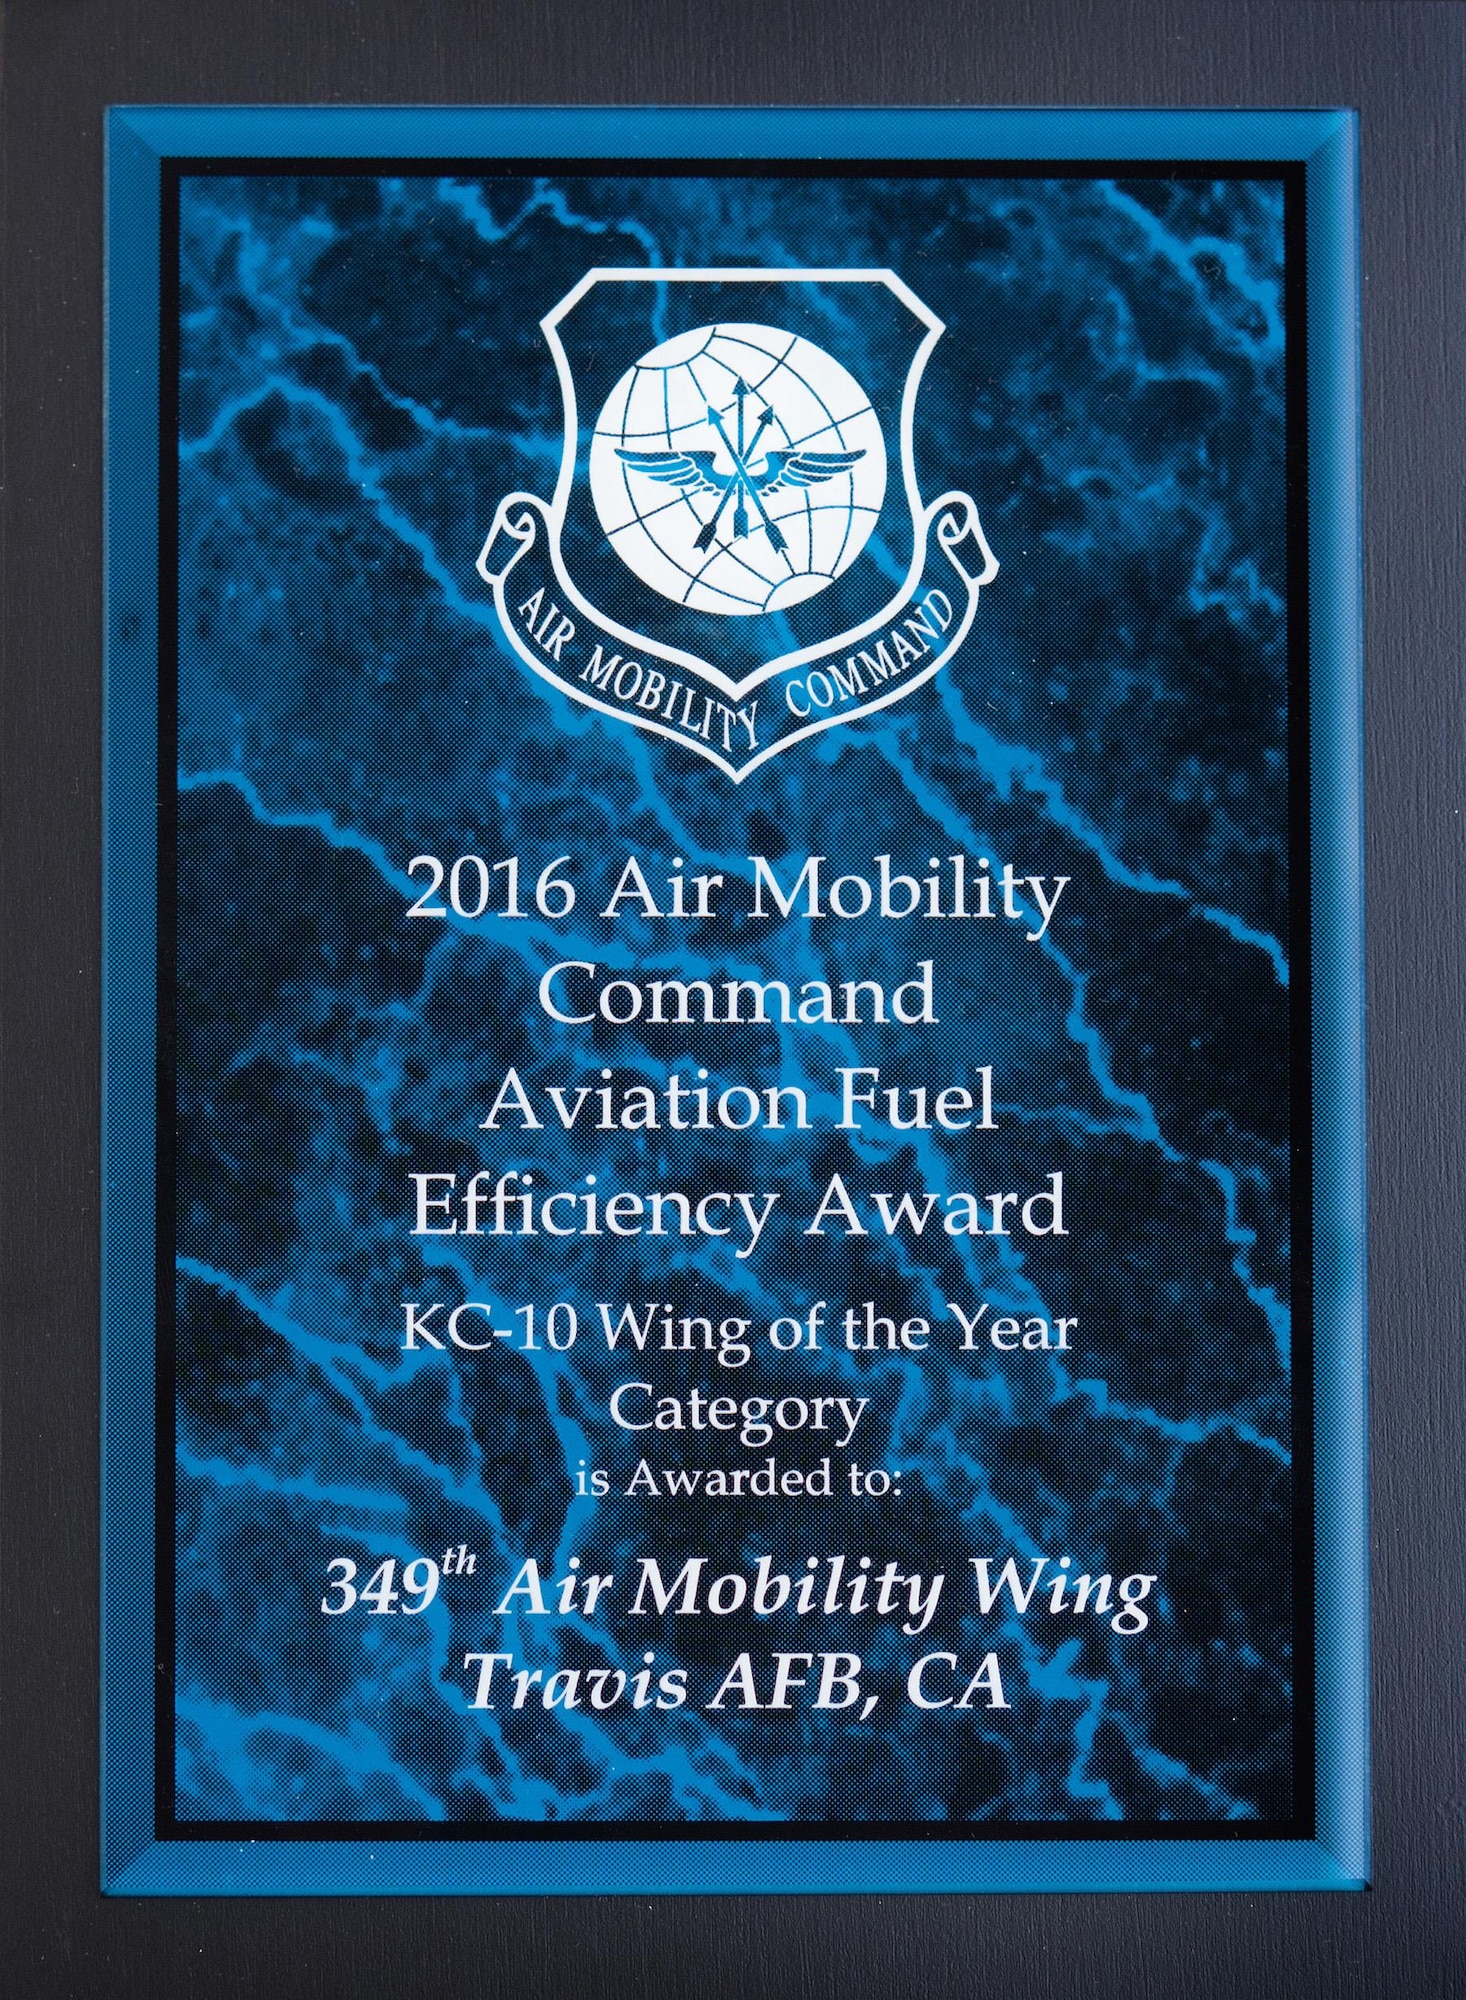 Gen Everhart presented AMC’s Fuel Efficiency Awards.  These awards recognize the outstanding work units have done this past year to increase energy awareness and efficiency.  The winners for 2016 are:
C-17, the 154 WG, Hawaii ANG at Hickam
C-130, the 153 AMW, Wyoming ANG at Cheyenne
C-5, the 436 AW, Dover AFB Active Duty
KC-10, the 349 AMW, Travis AFB Reserves
KC-135, the 126 ARW, Illinois ANG at Scott AFB
(courtesy photo) 
